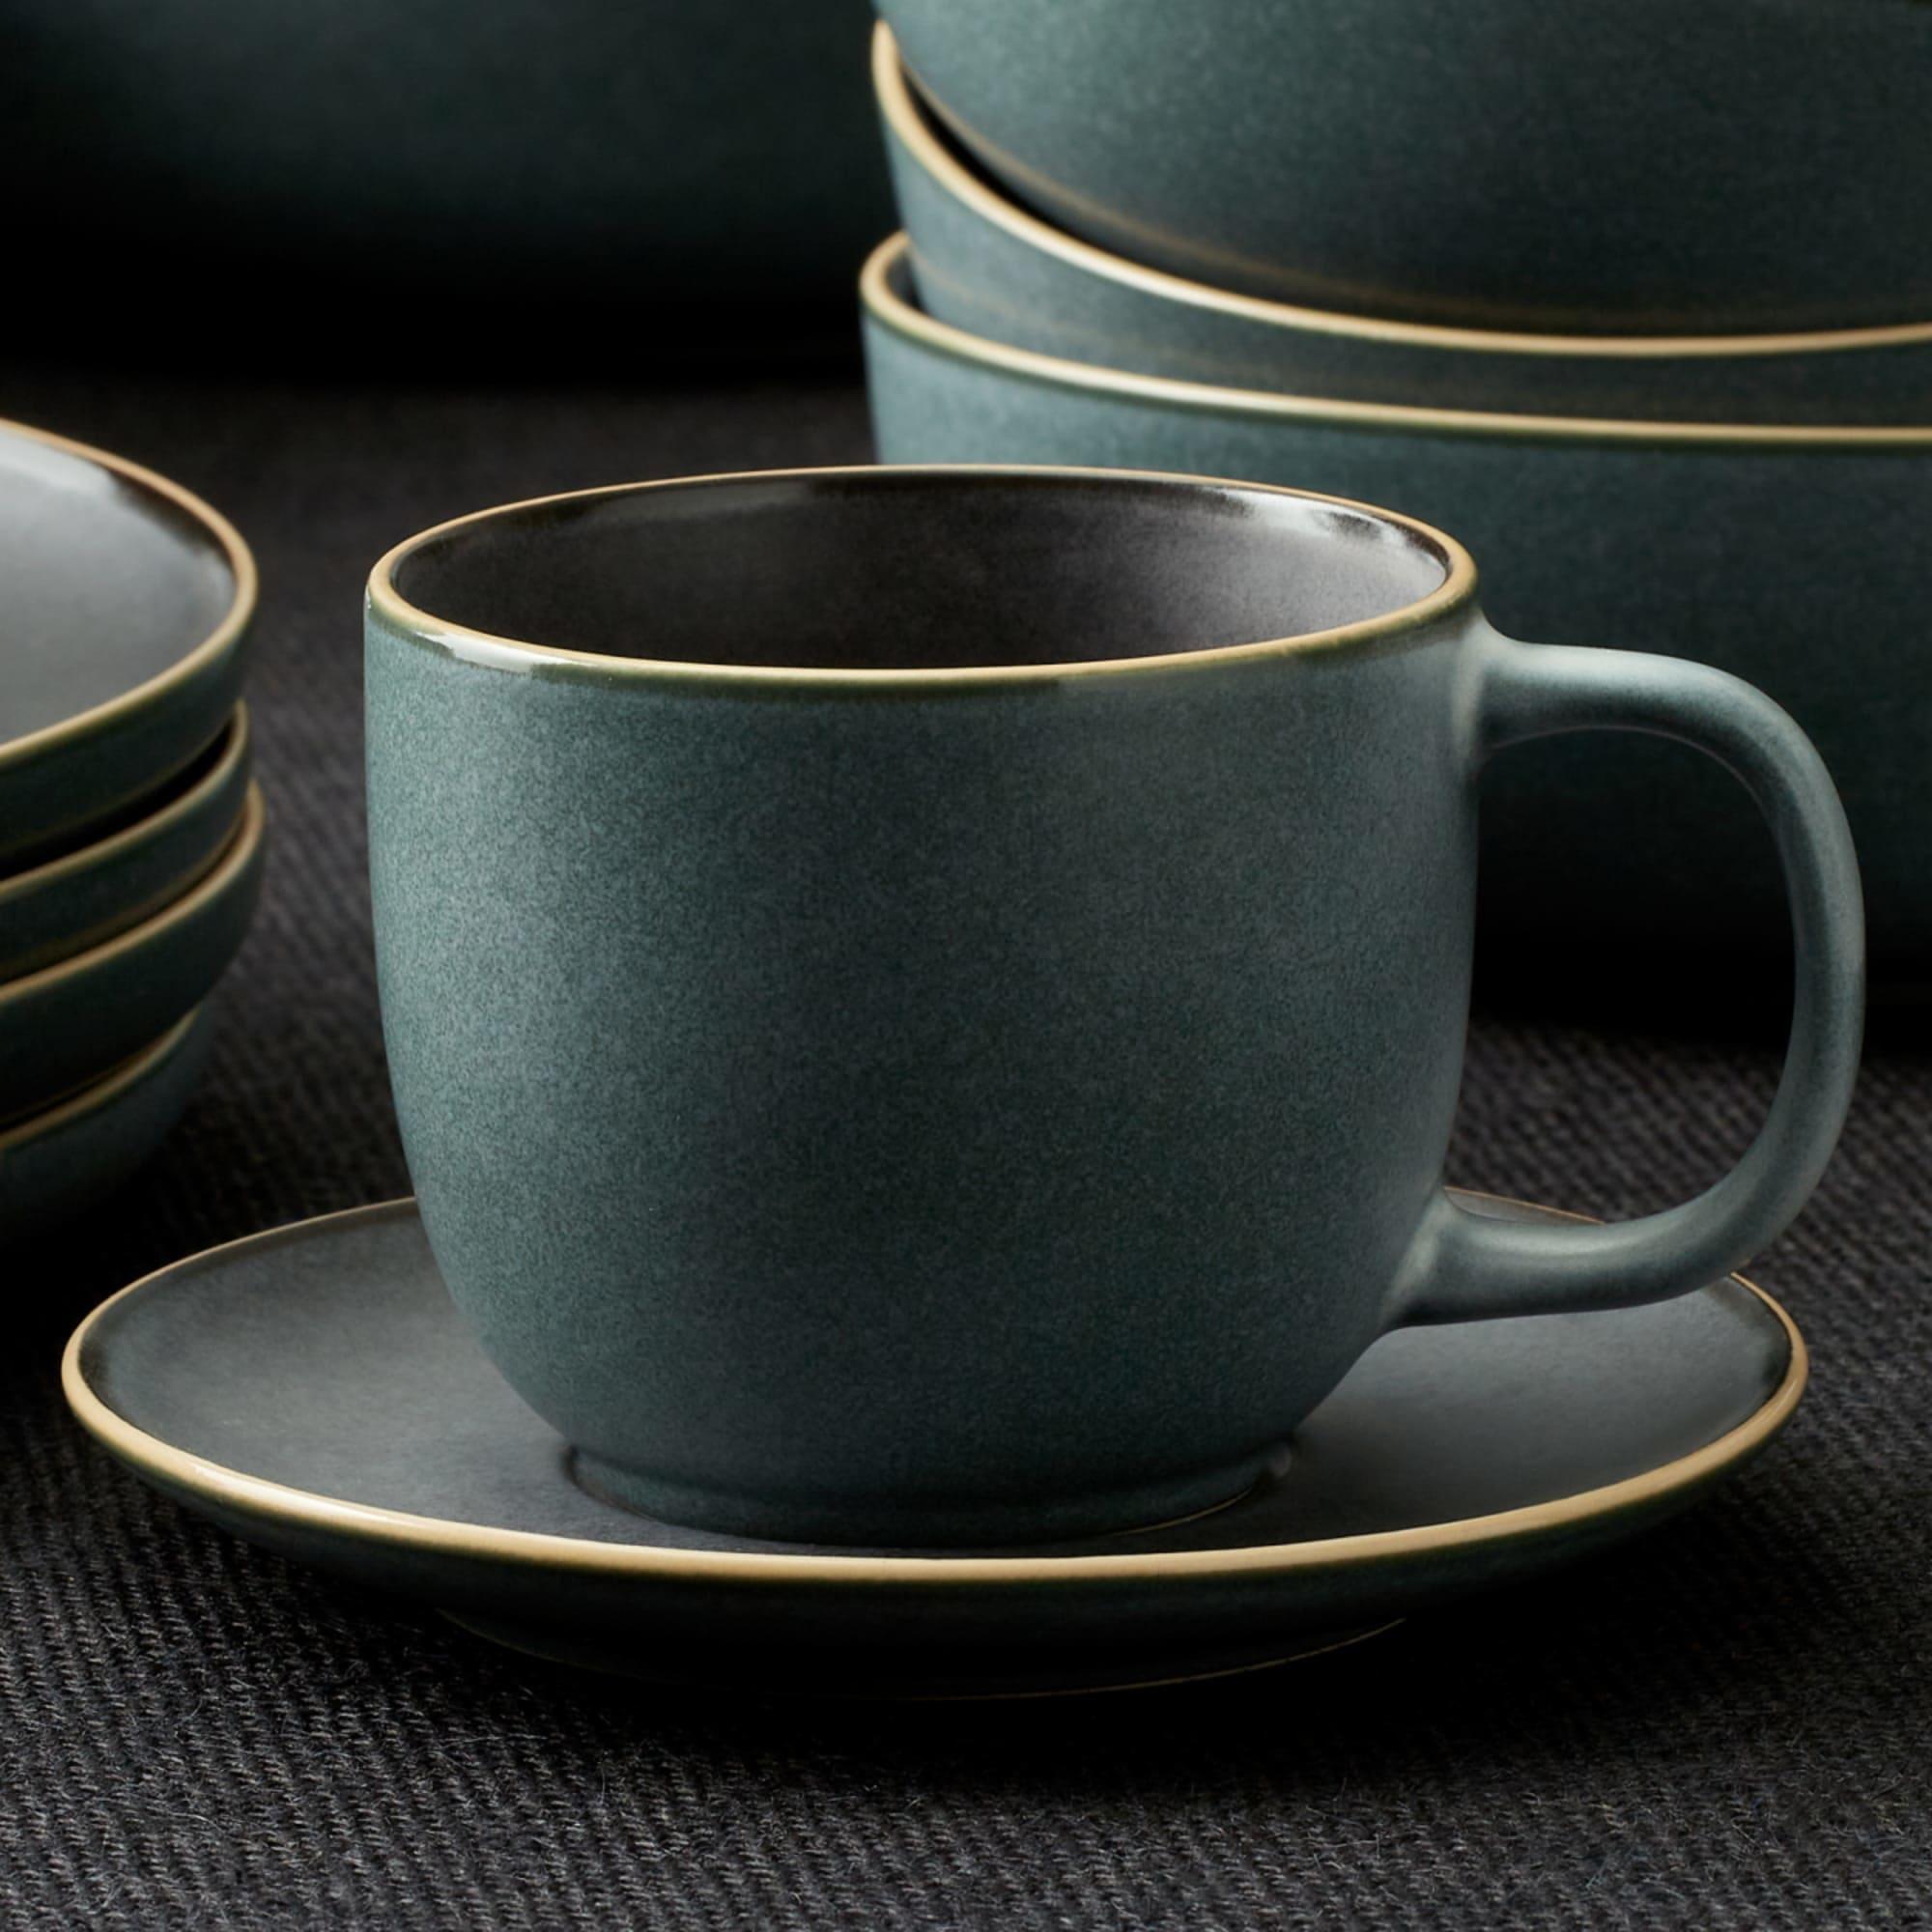 Salisbury & Co Eclipse Tea Cup and Saucer 300ml Green Image 2